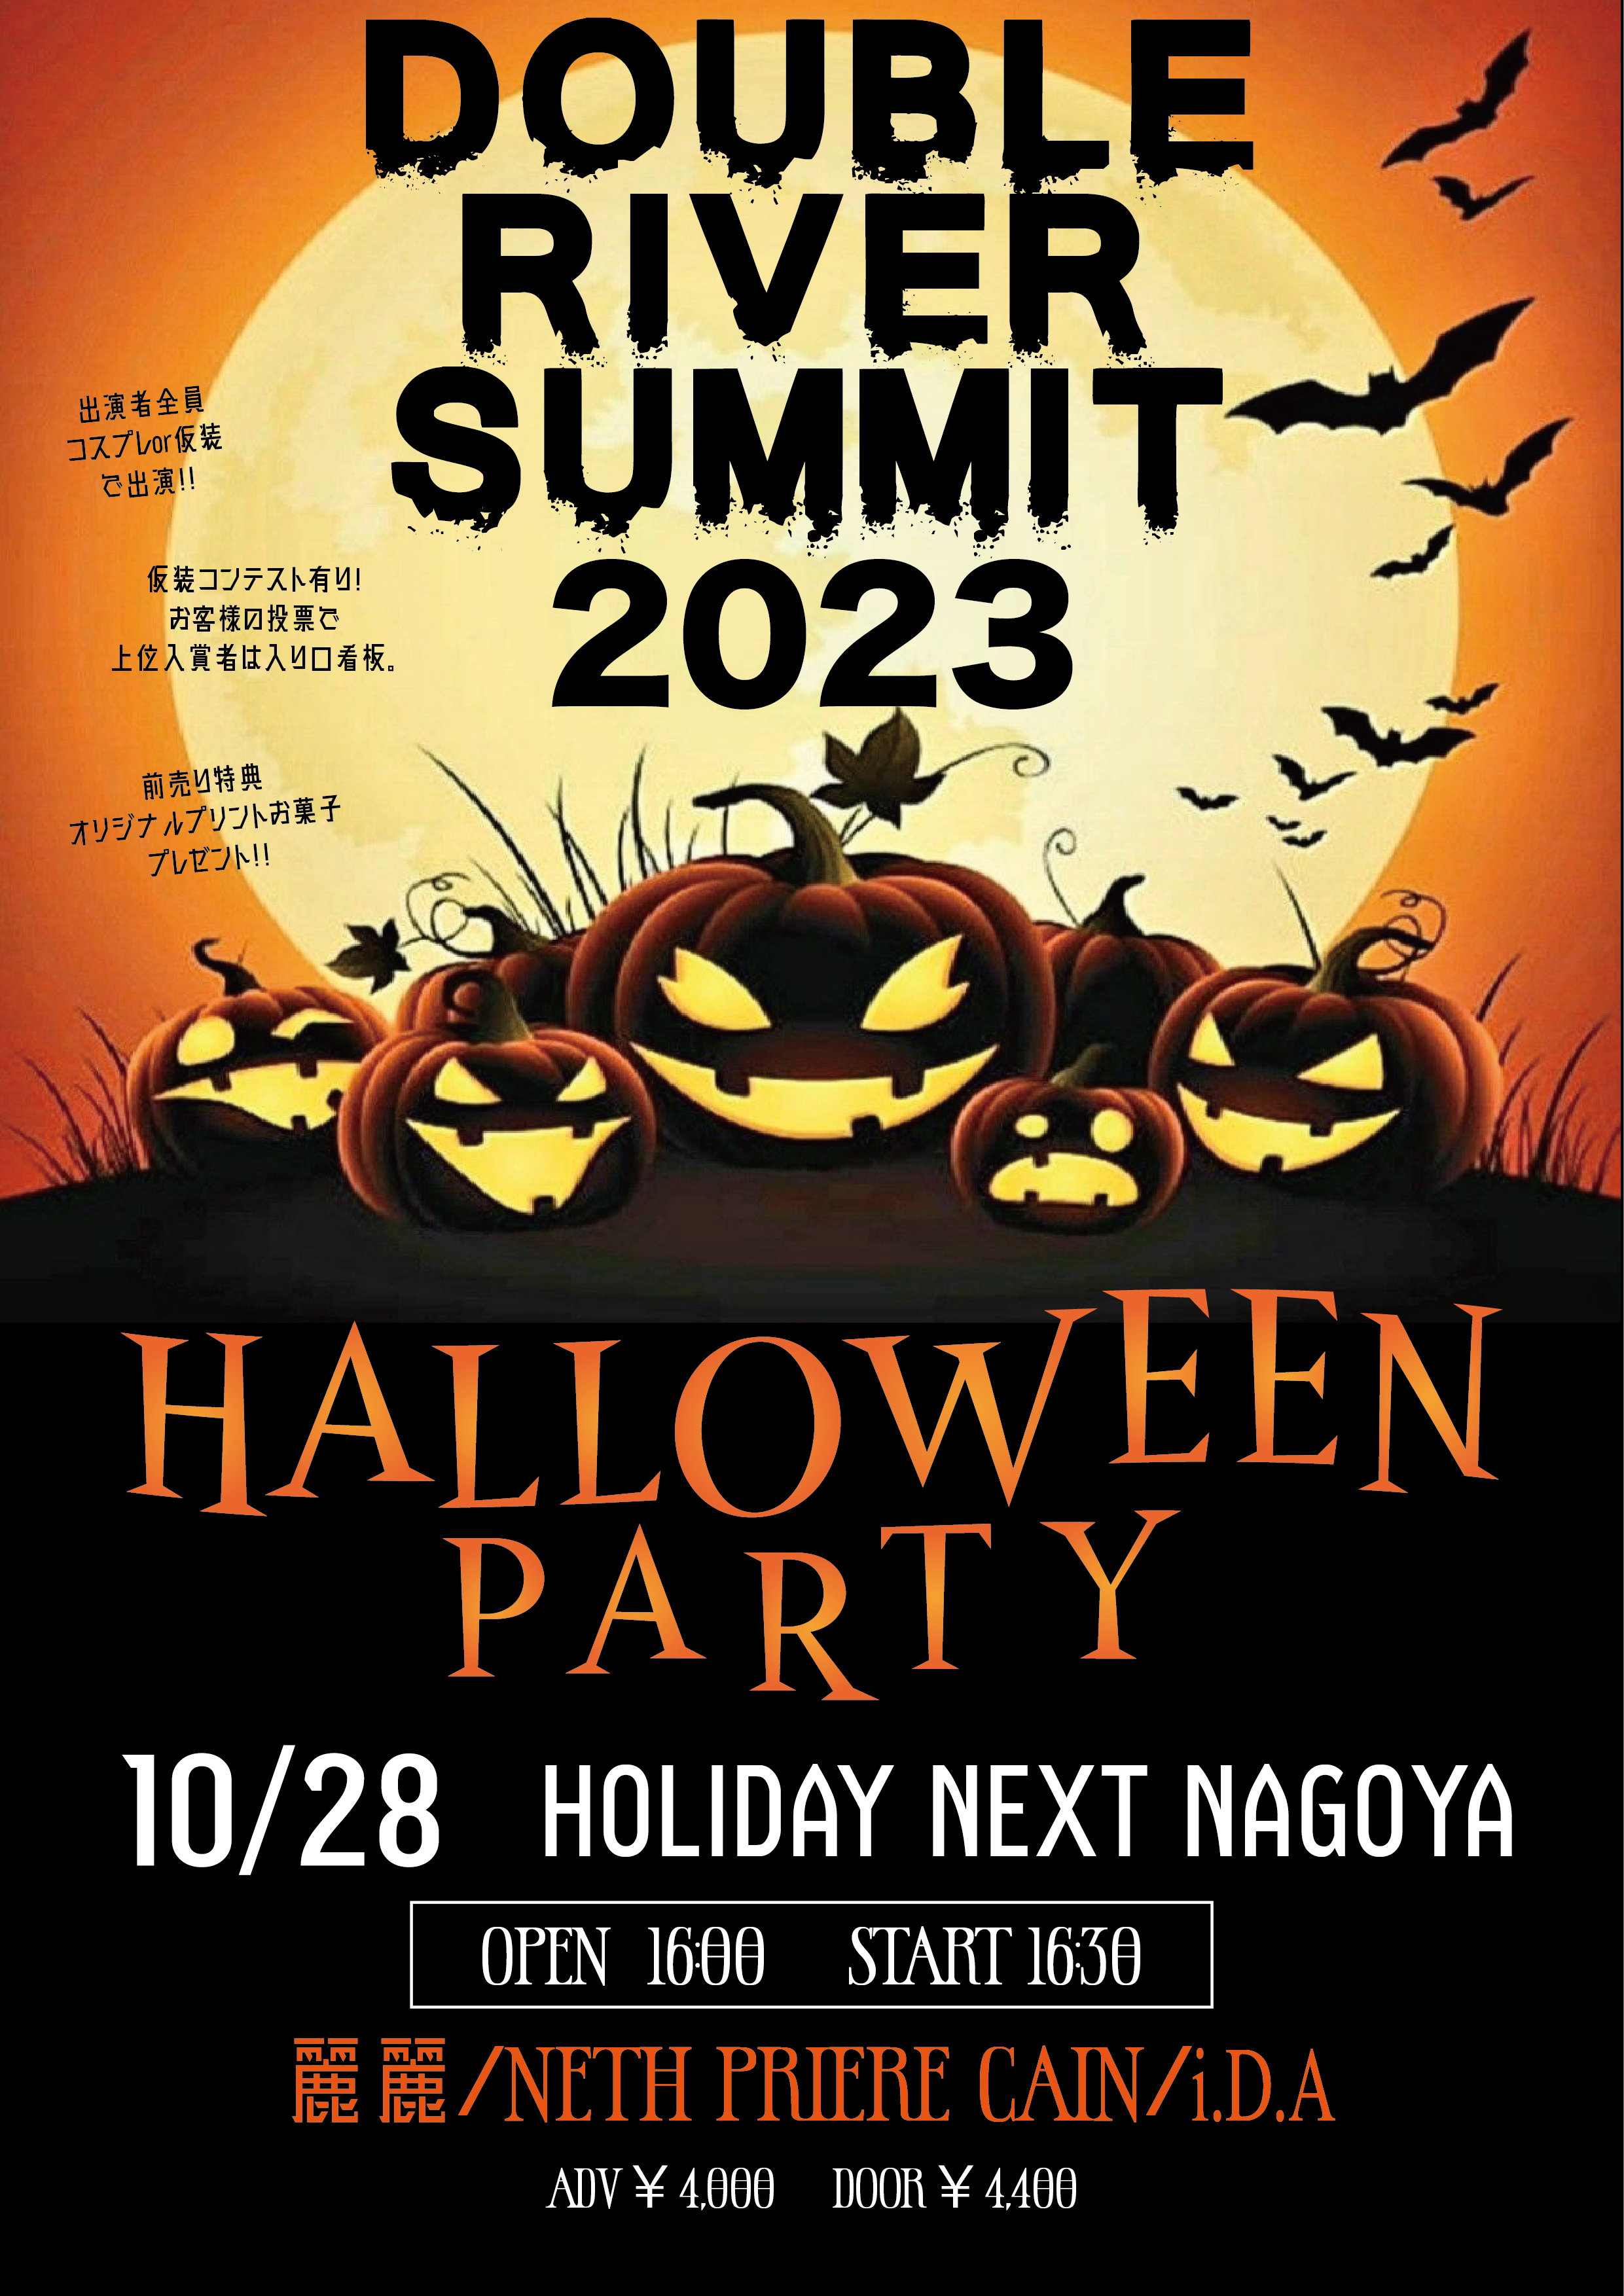 DOUBLE RIVER SUMMIT 2023-HALLOWEEN PARTY-